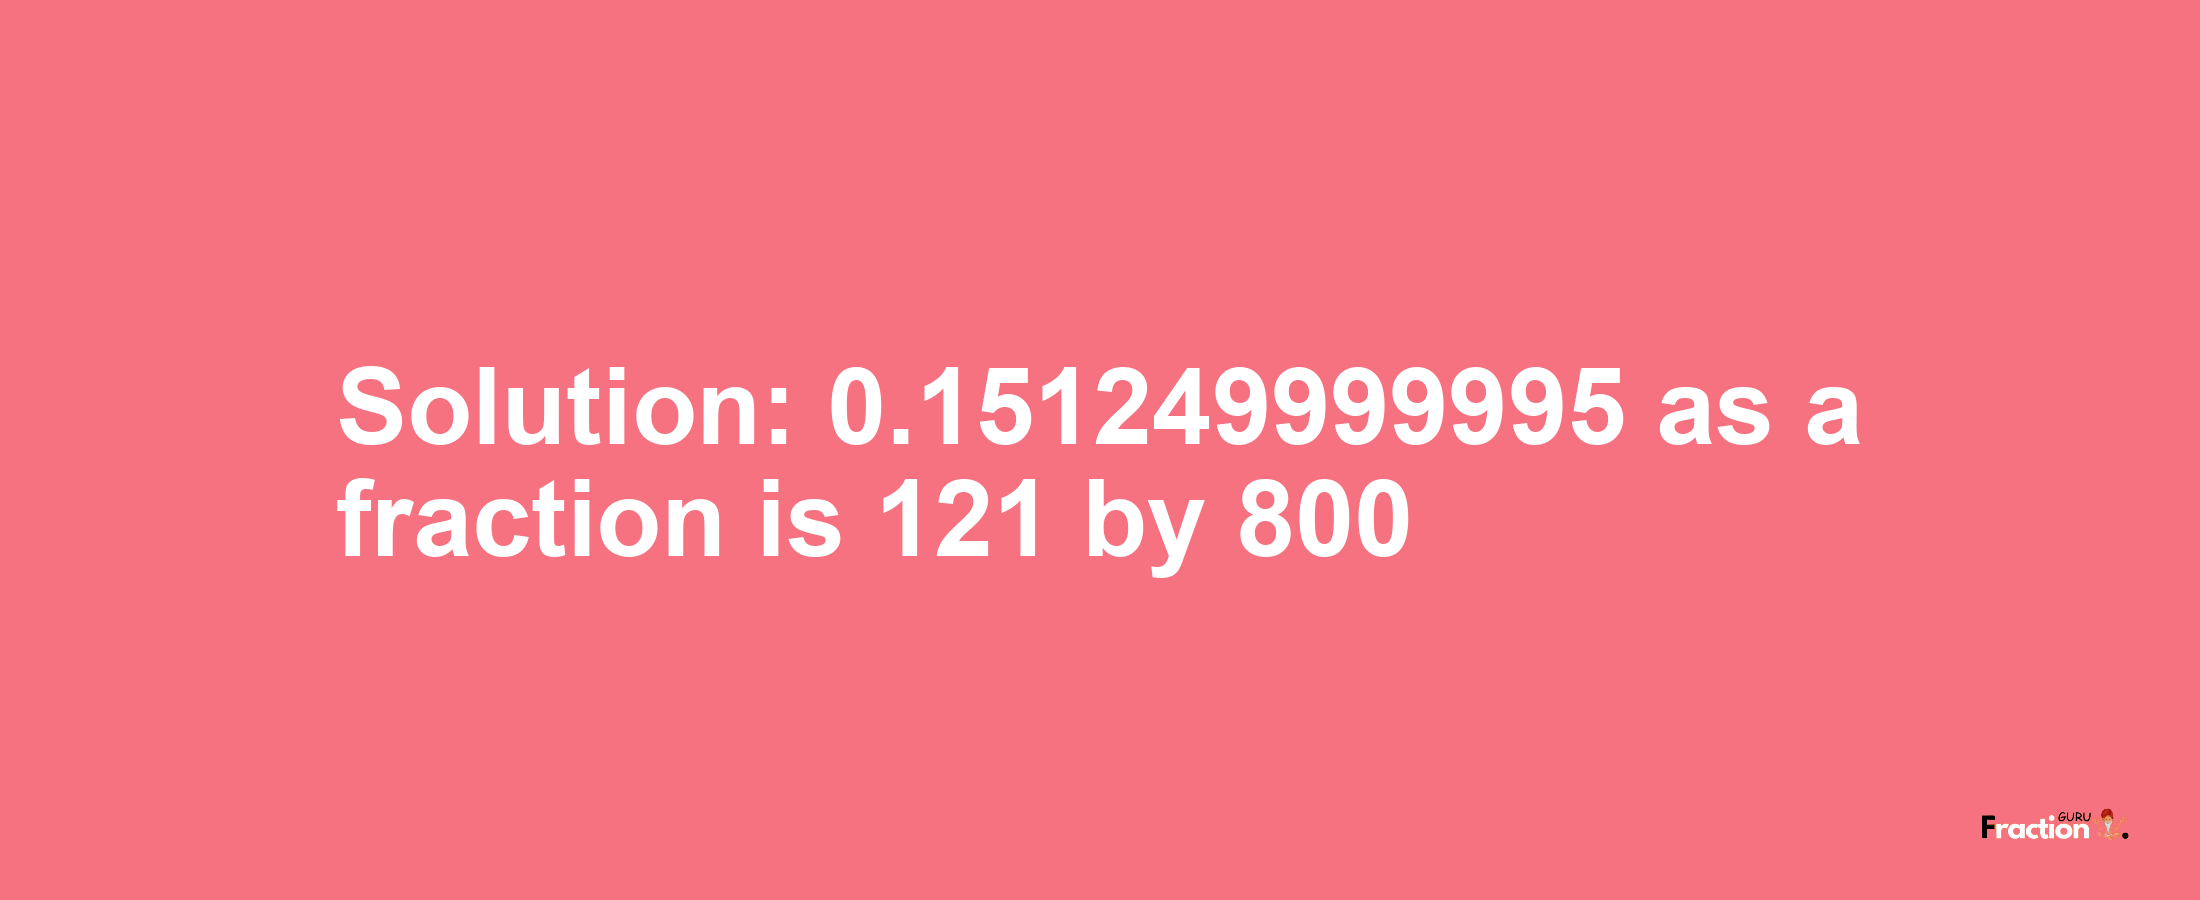 Solution:0.151249999995 as a fraction is 121/800